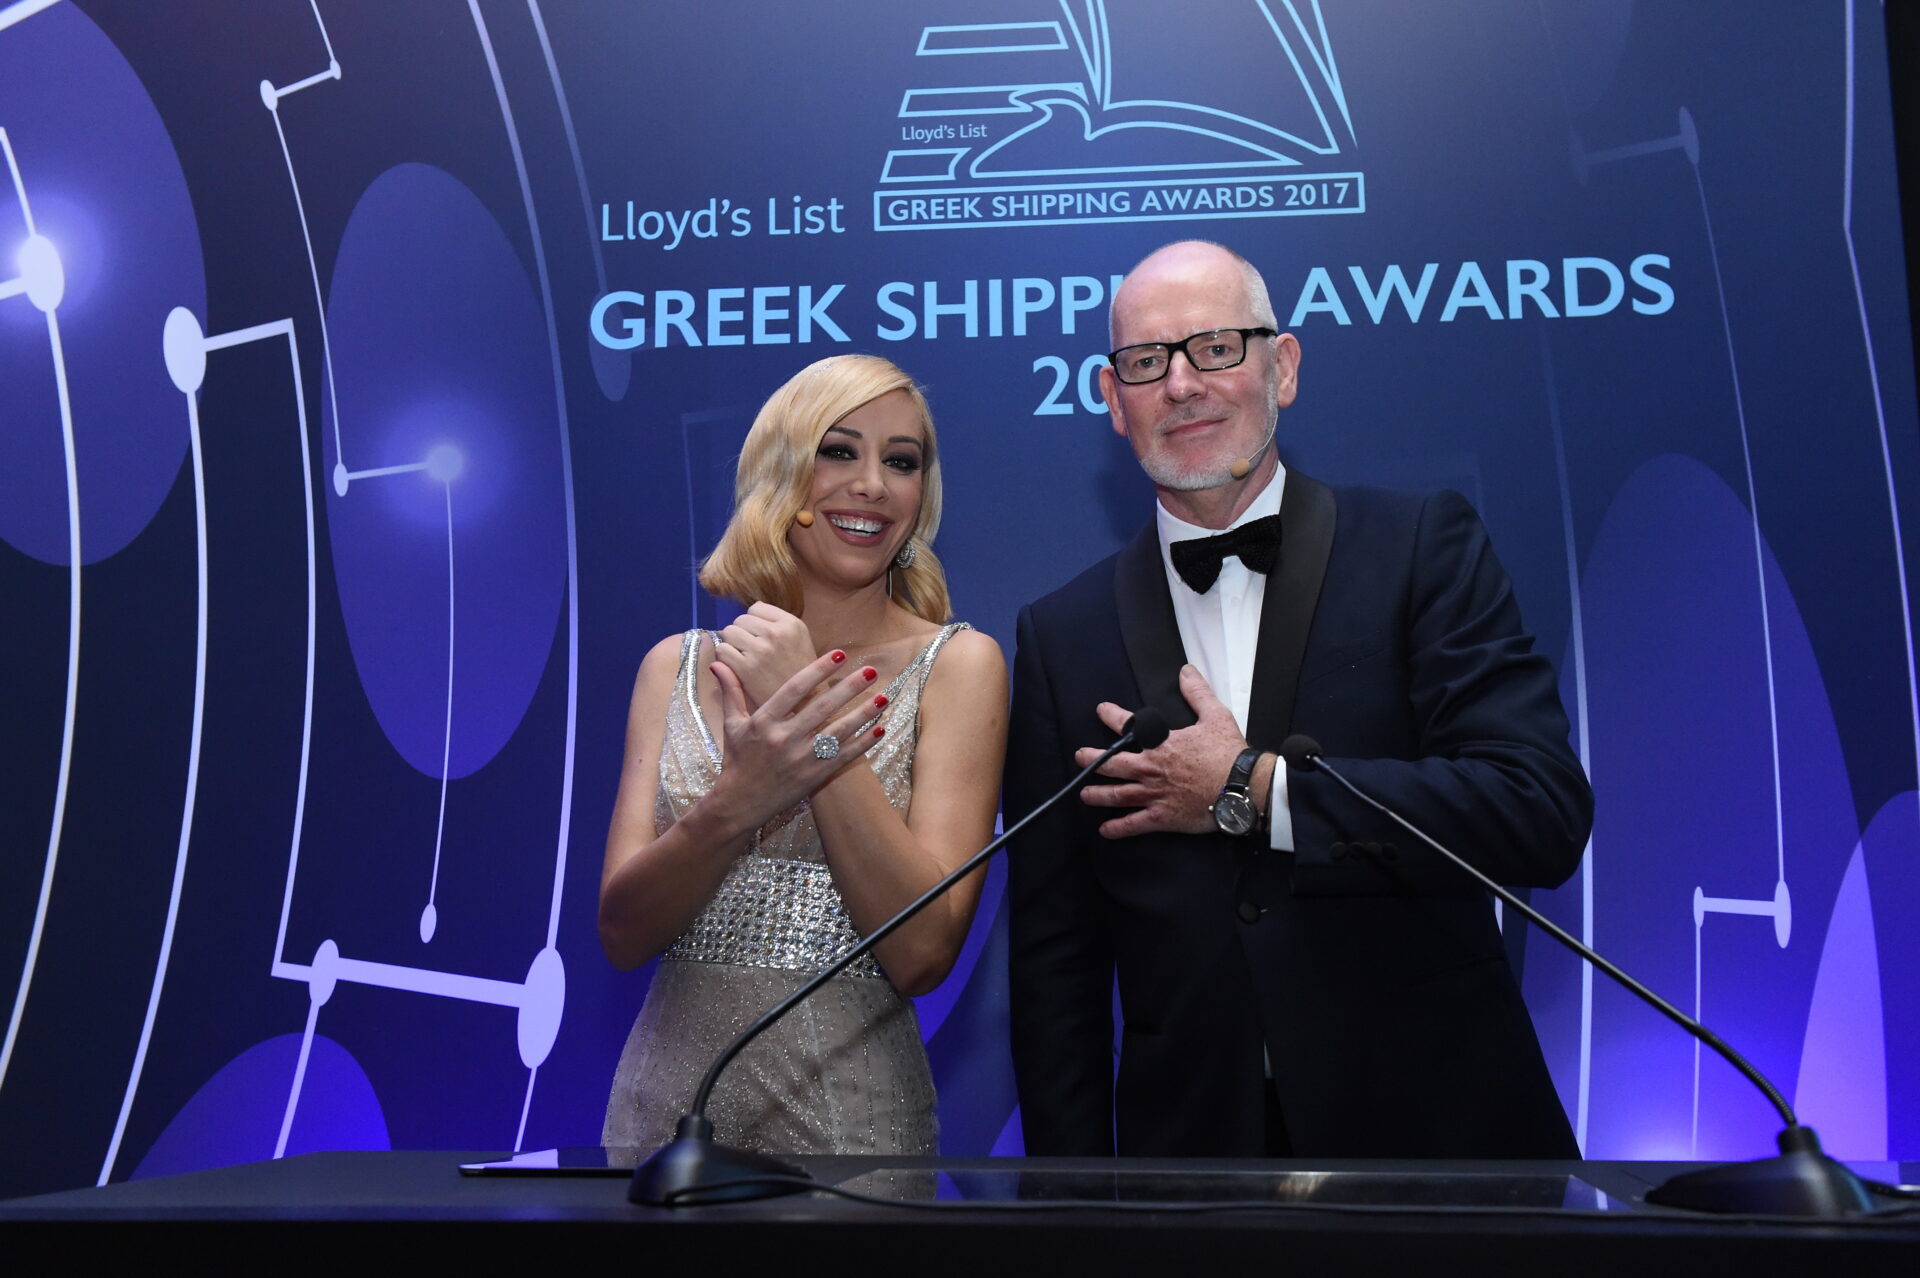 Co-hosts for the 2017 Greek Shipping Awards were Andriana Paraskevopoulou and Nigel Lowry.